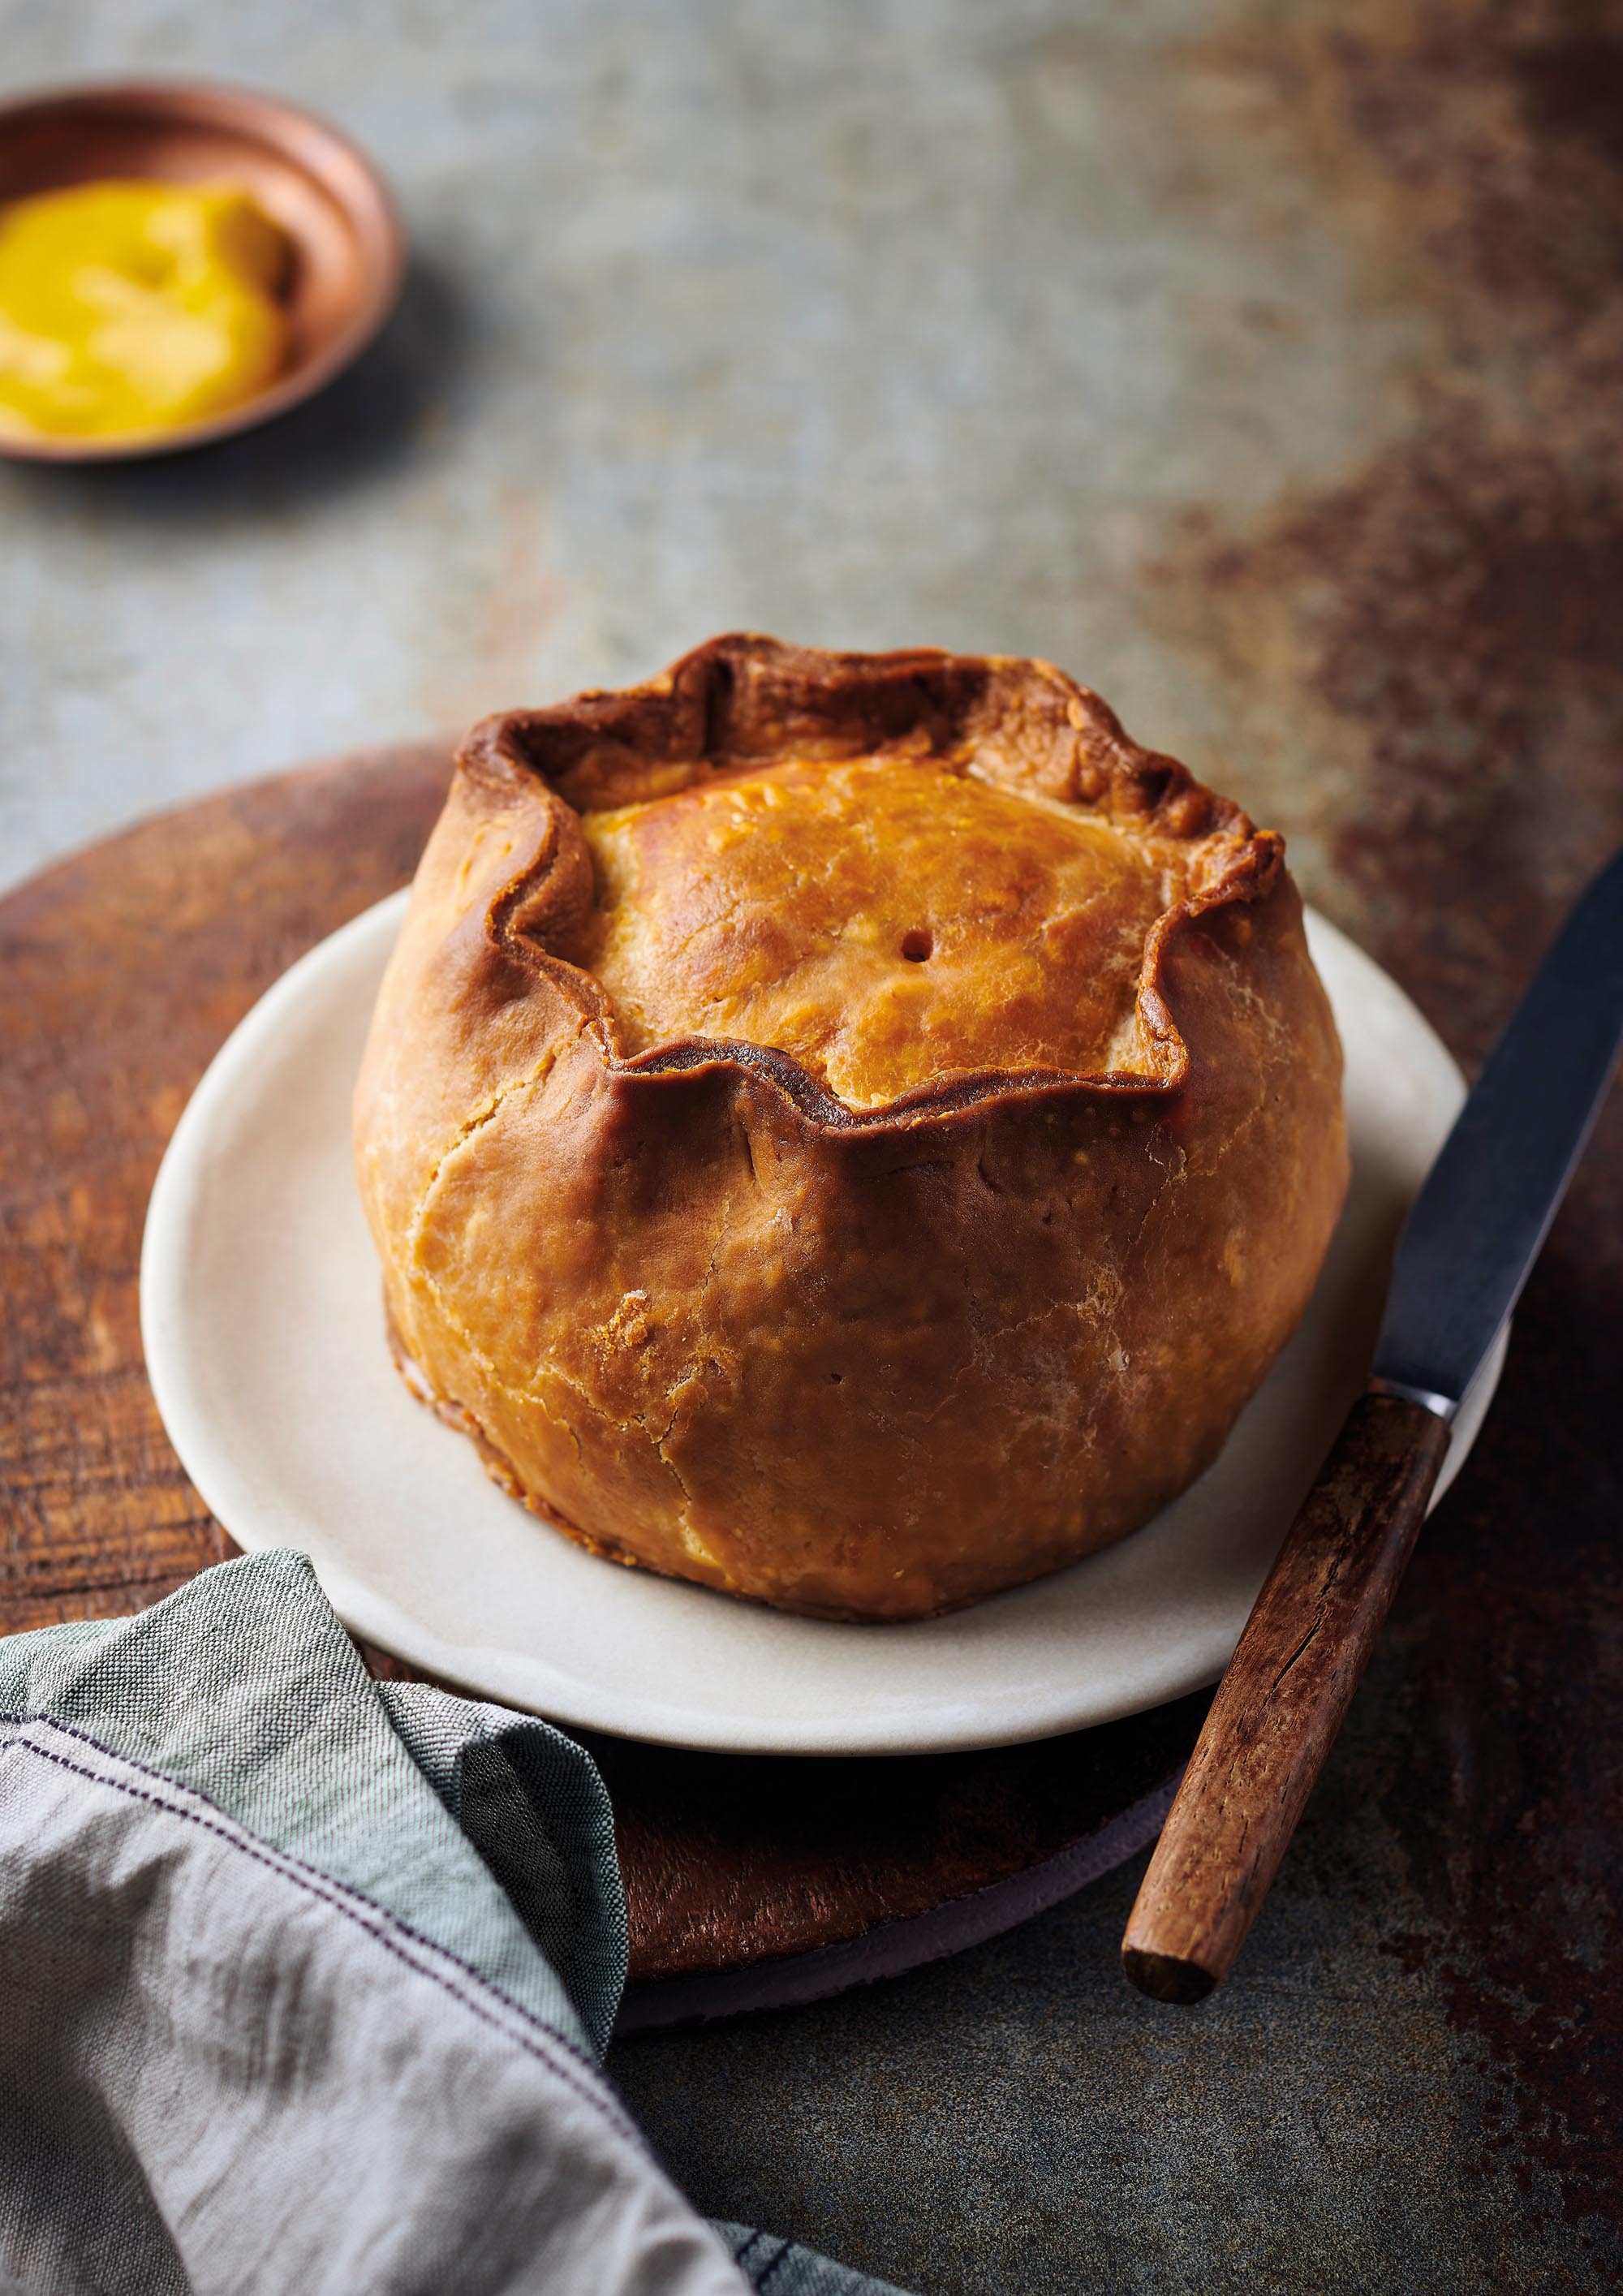 Pies made by Walker & Son -